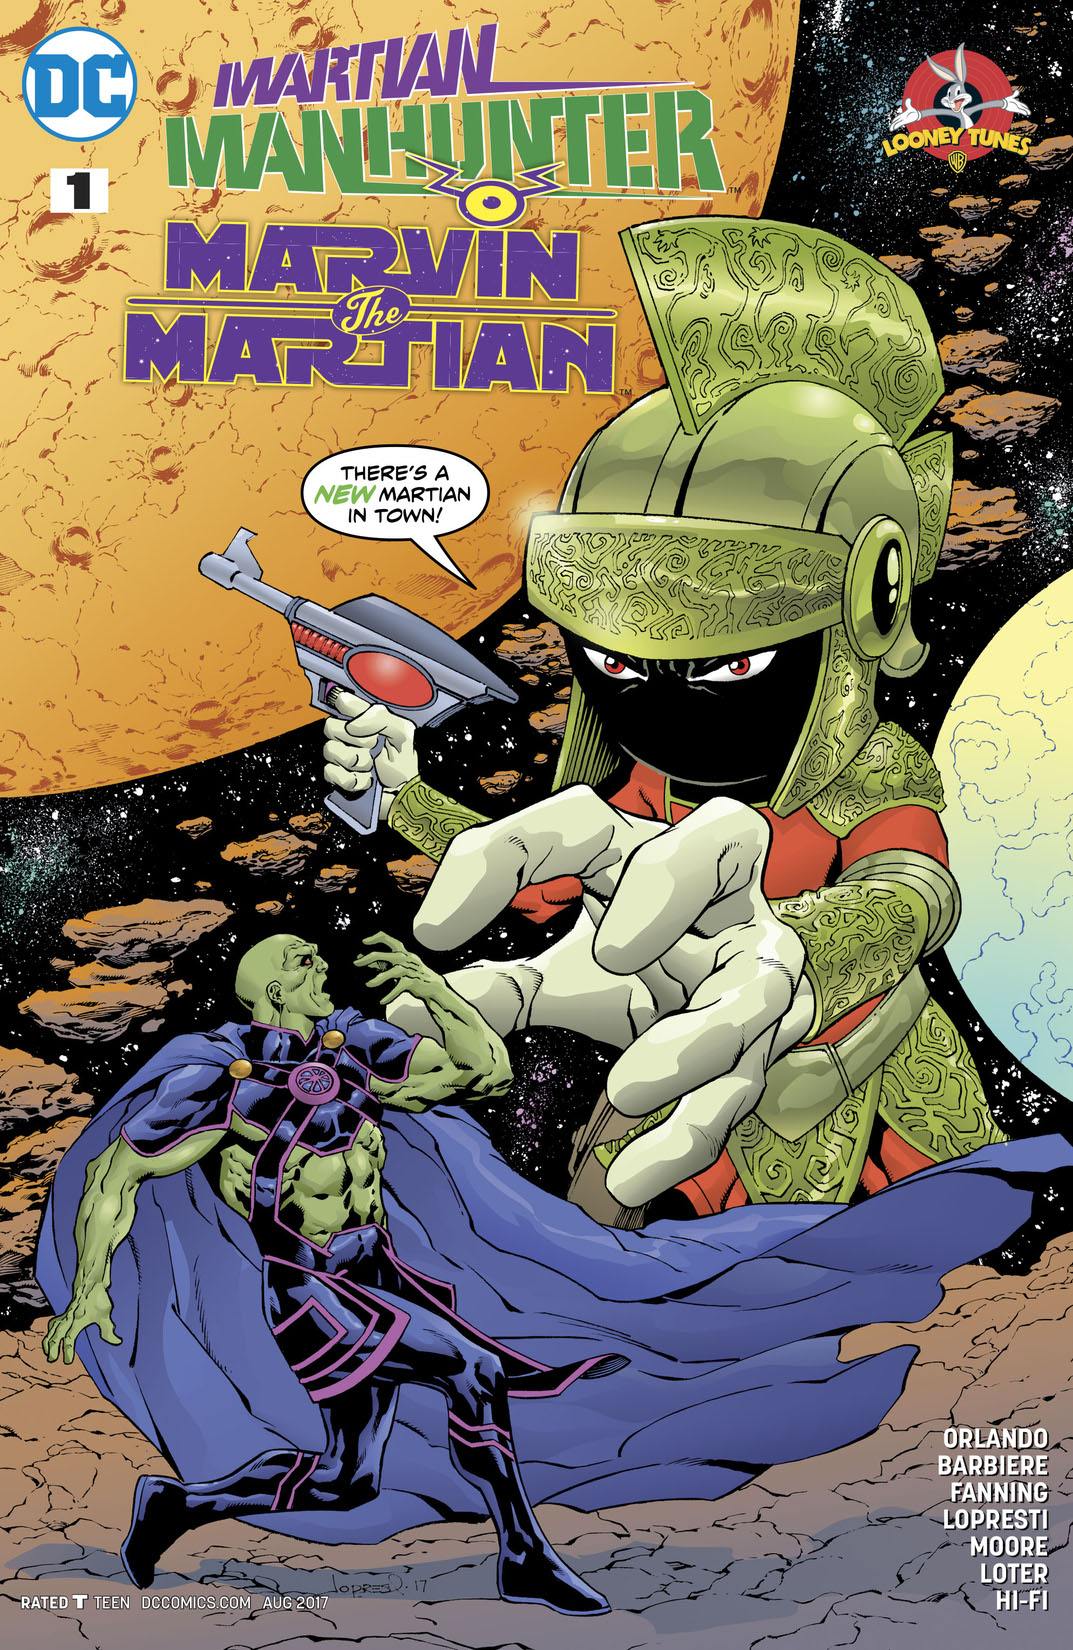 Martian Manhunter/Marvin the Martian Special #1 preview images